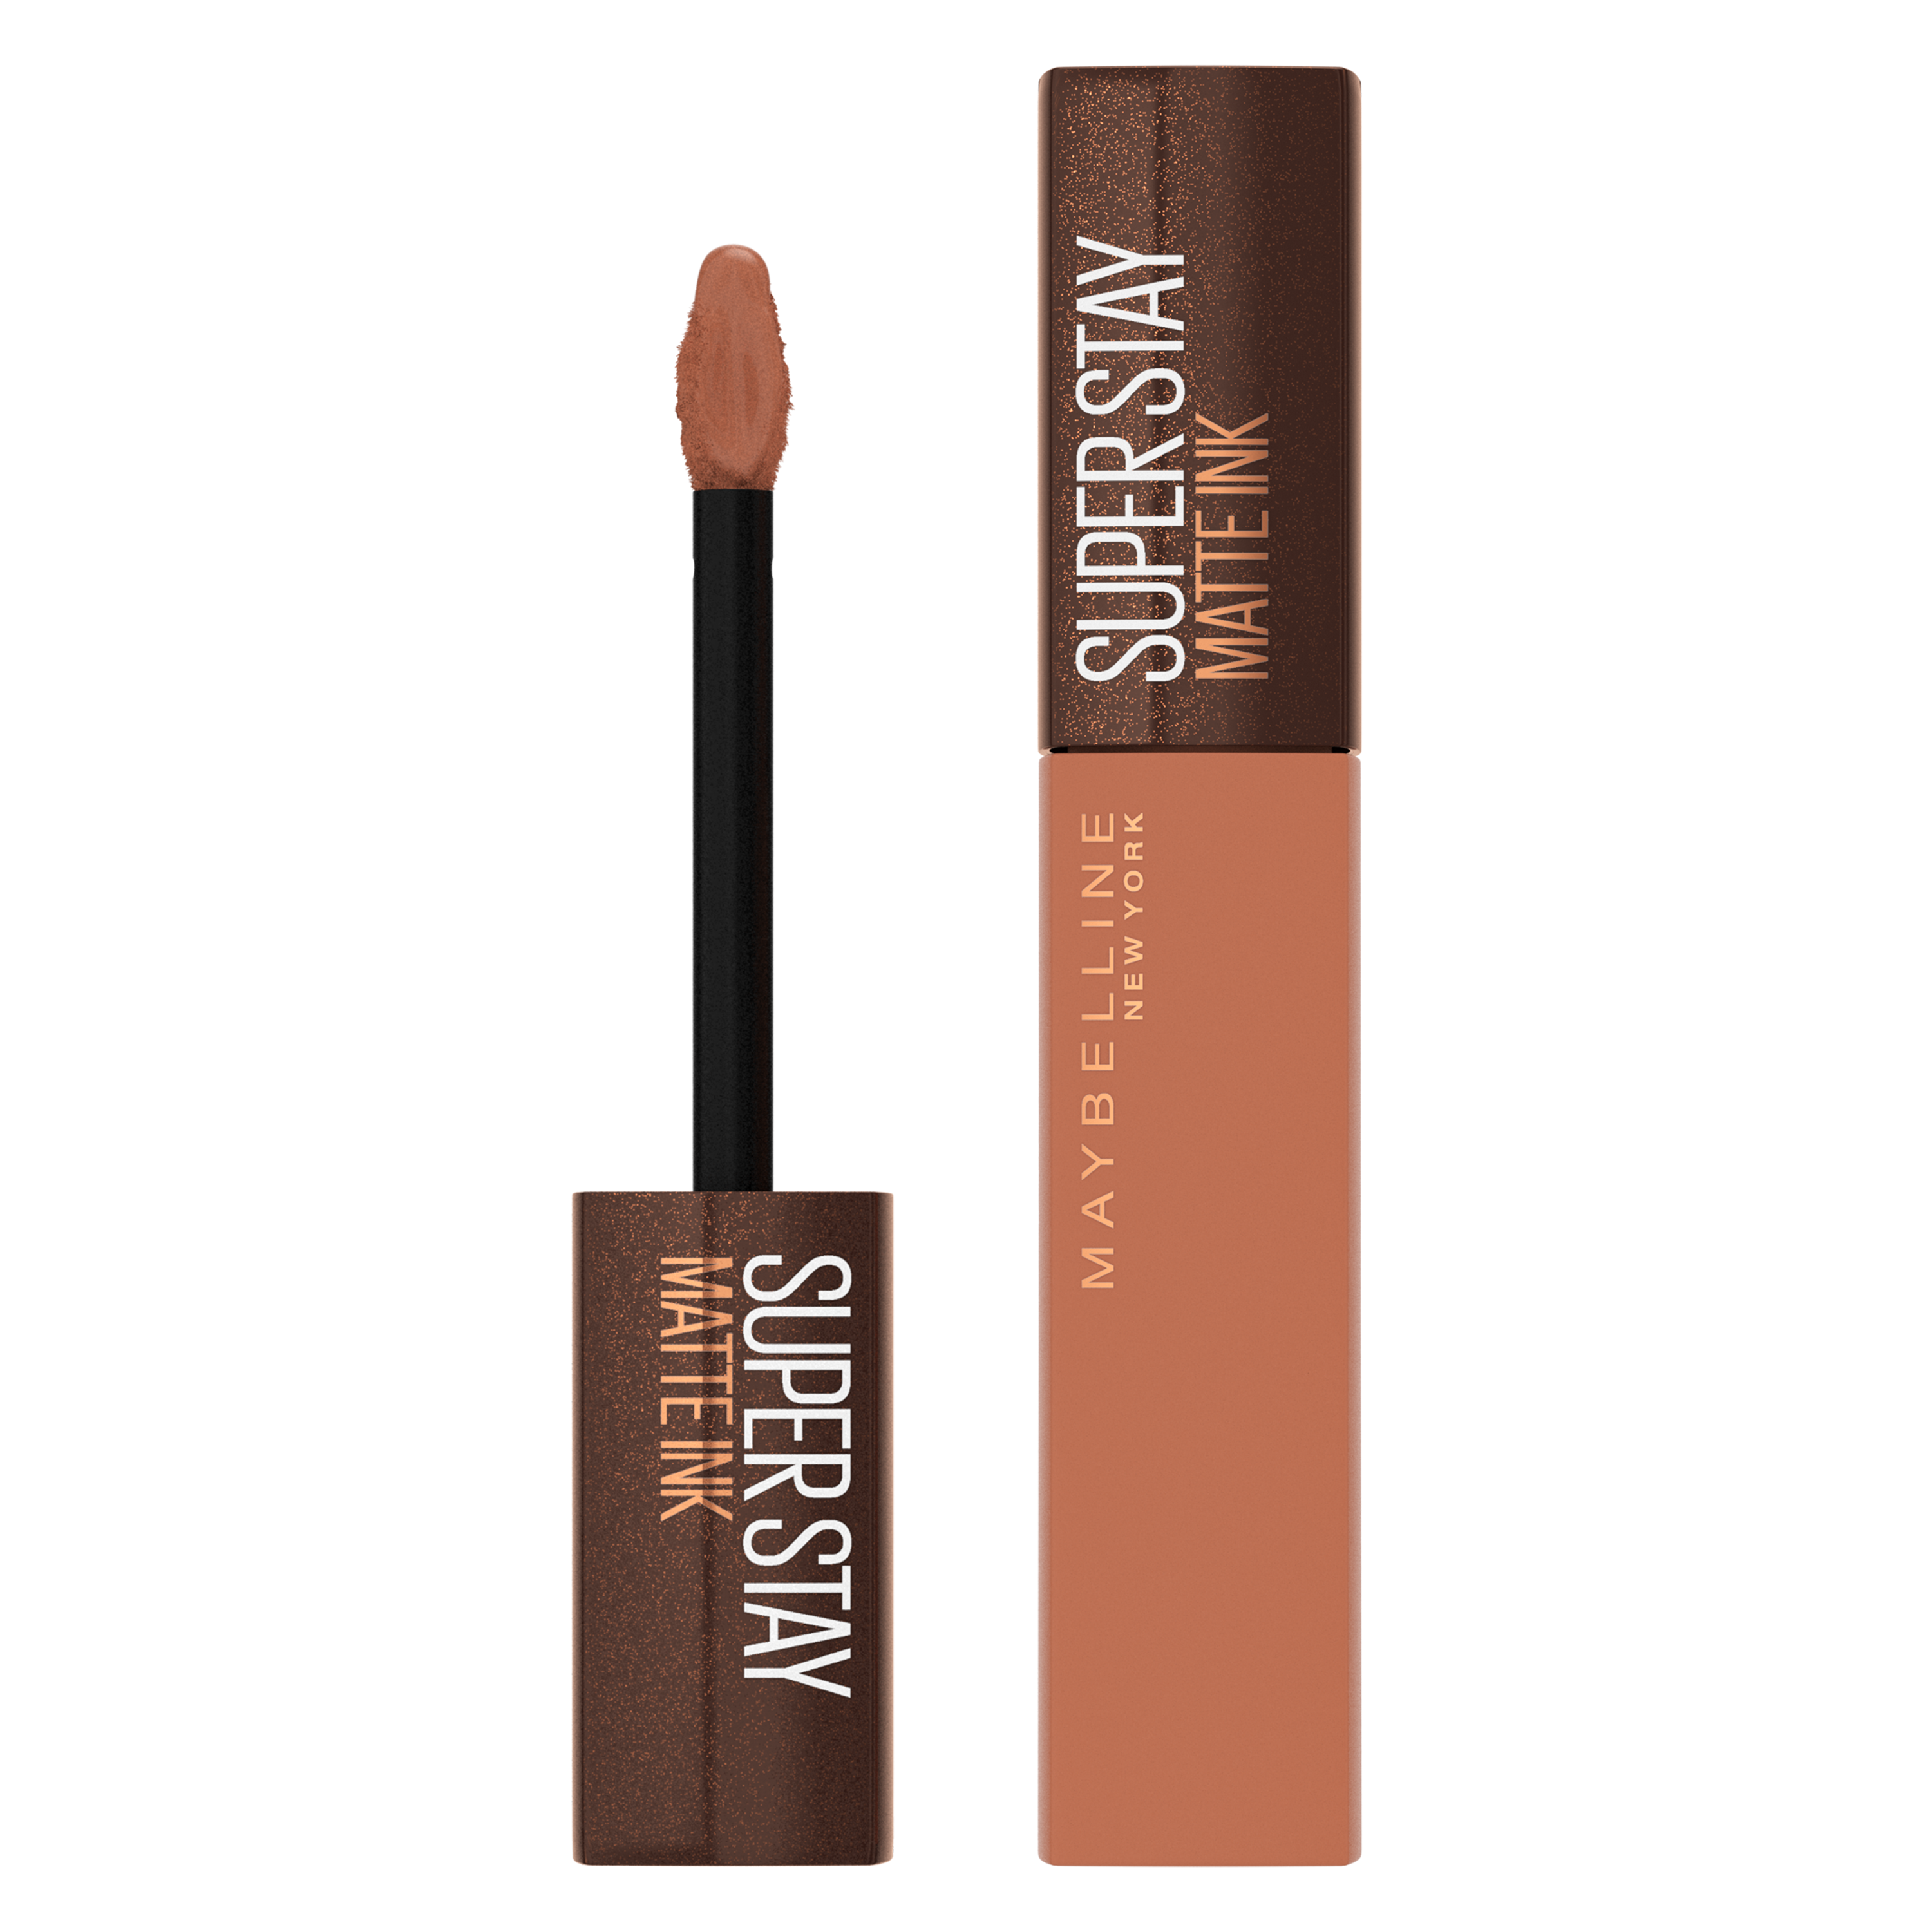 Maybelline SuperStay Matte Ink Lipstick Coffee Collection Limited Edition - 255 Chai Genius - Nude Lippenstift - 5 ml